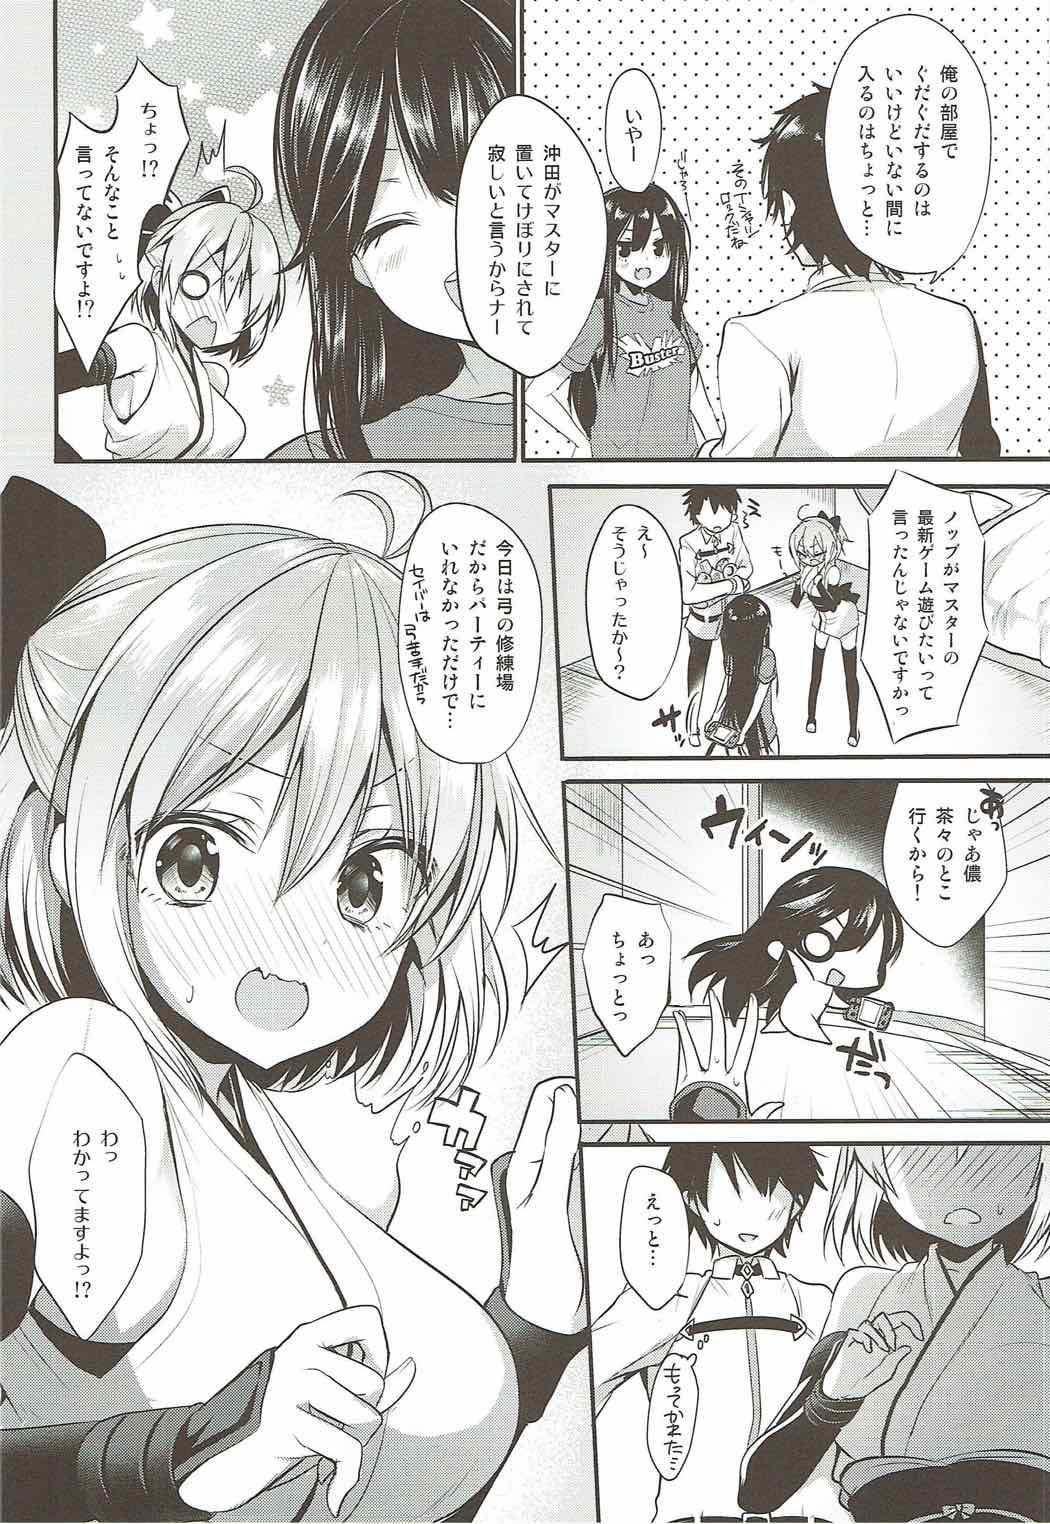 Pack sweet room - Fate grand order Amateur Asian - Page 4